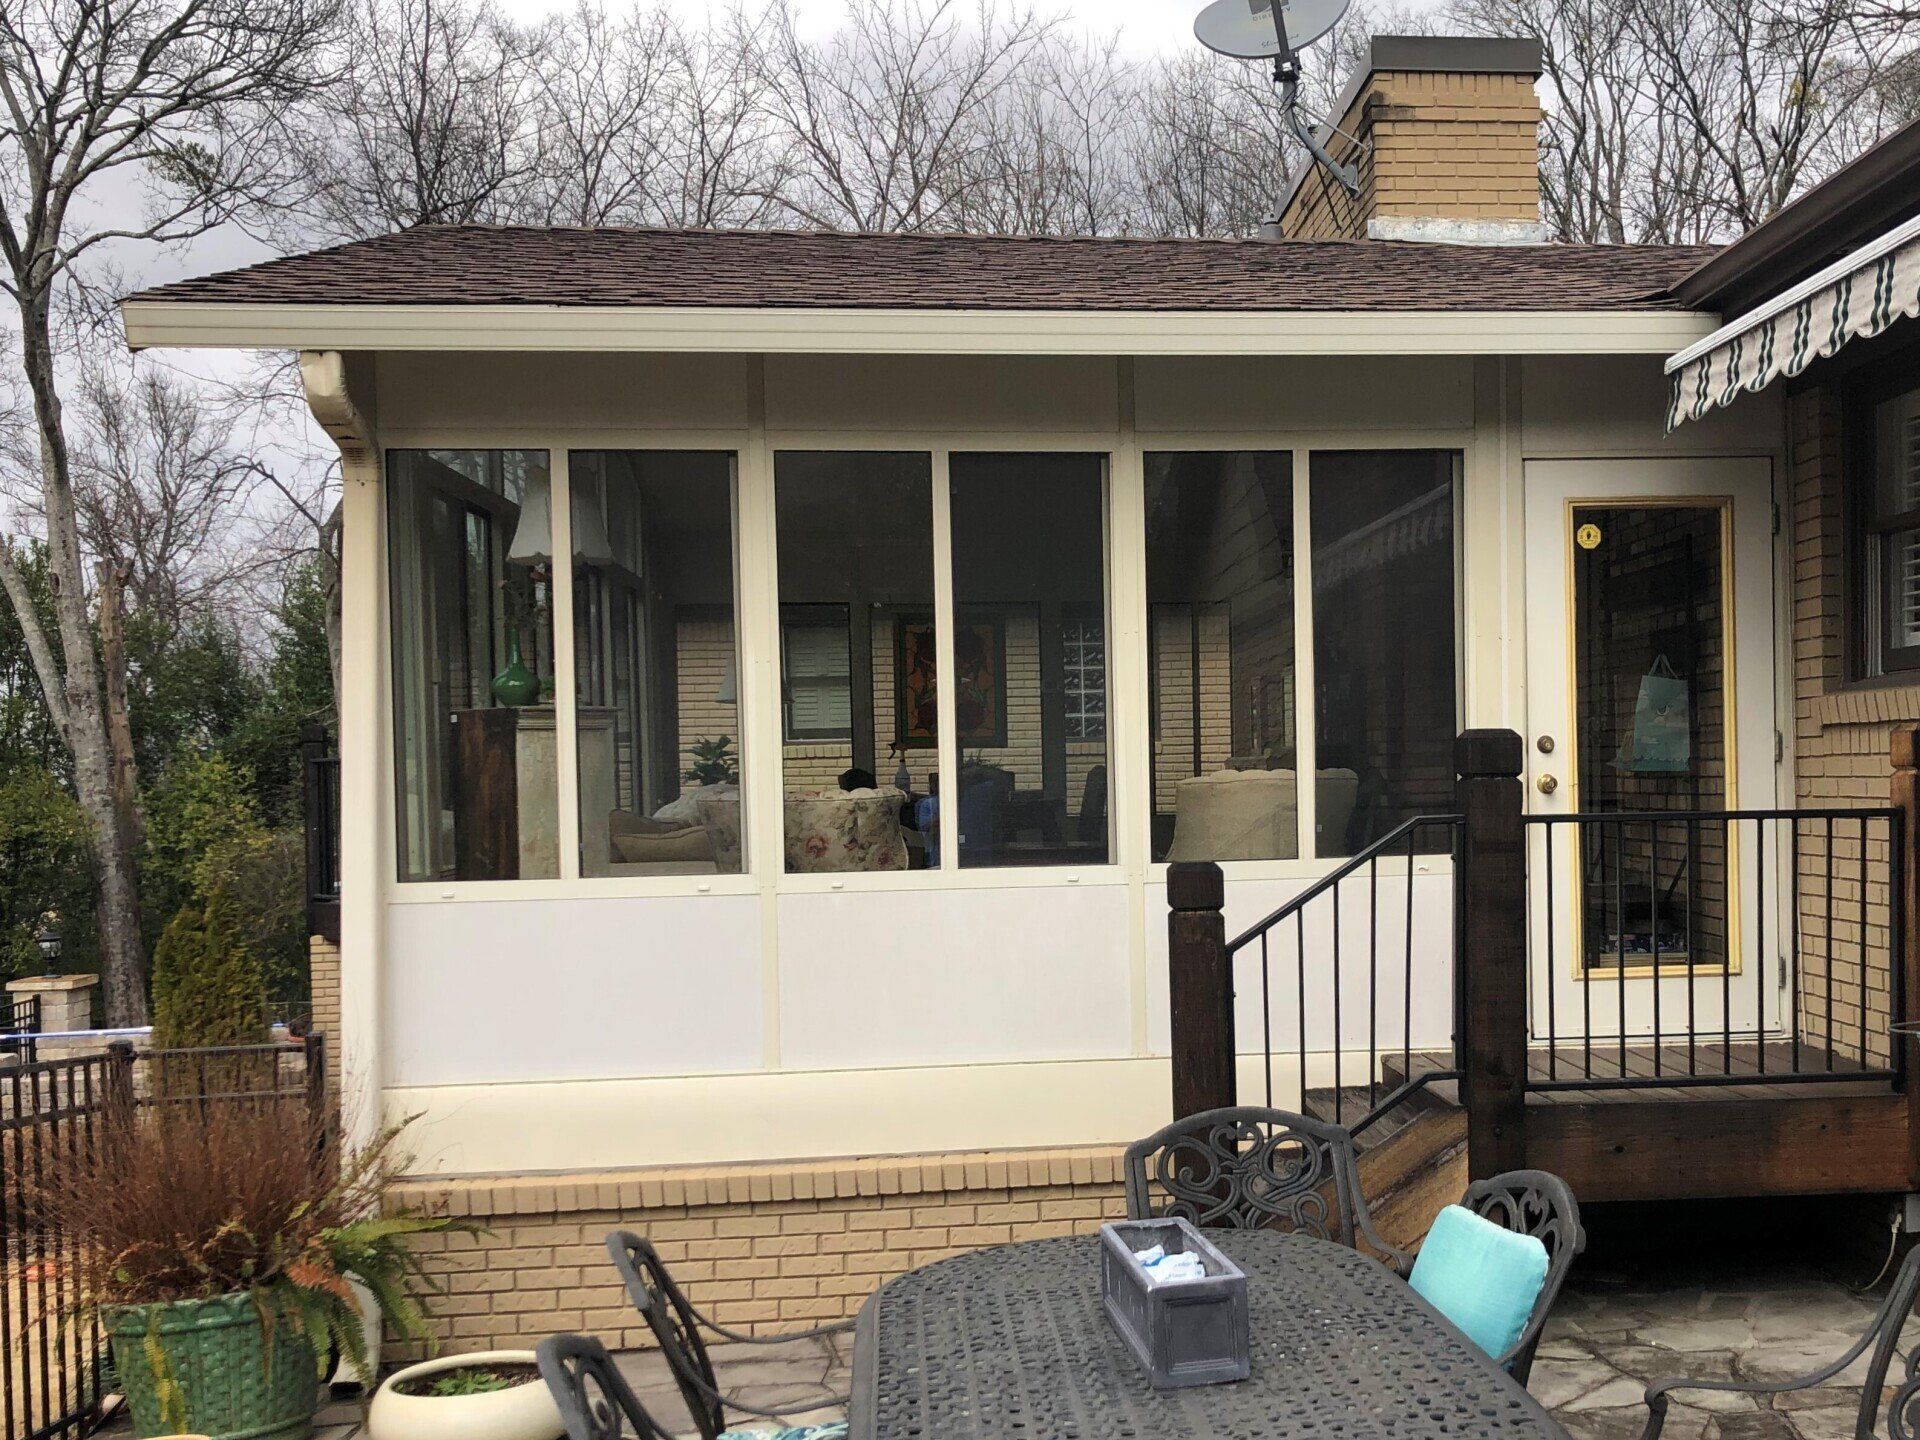 home tinting in Birmingham, AL - First bright Sun & UV was causing distortion inside this new Sunroom. Then heat gain stood out in Birmingham, AL